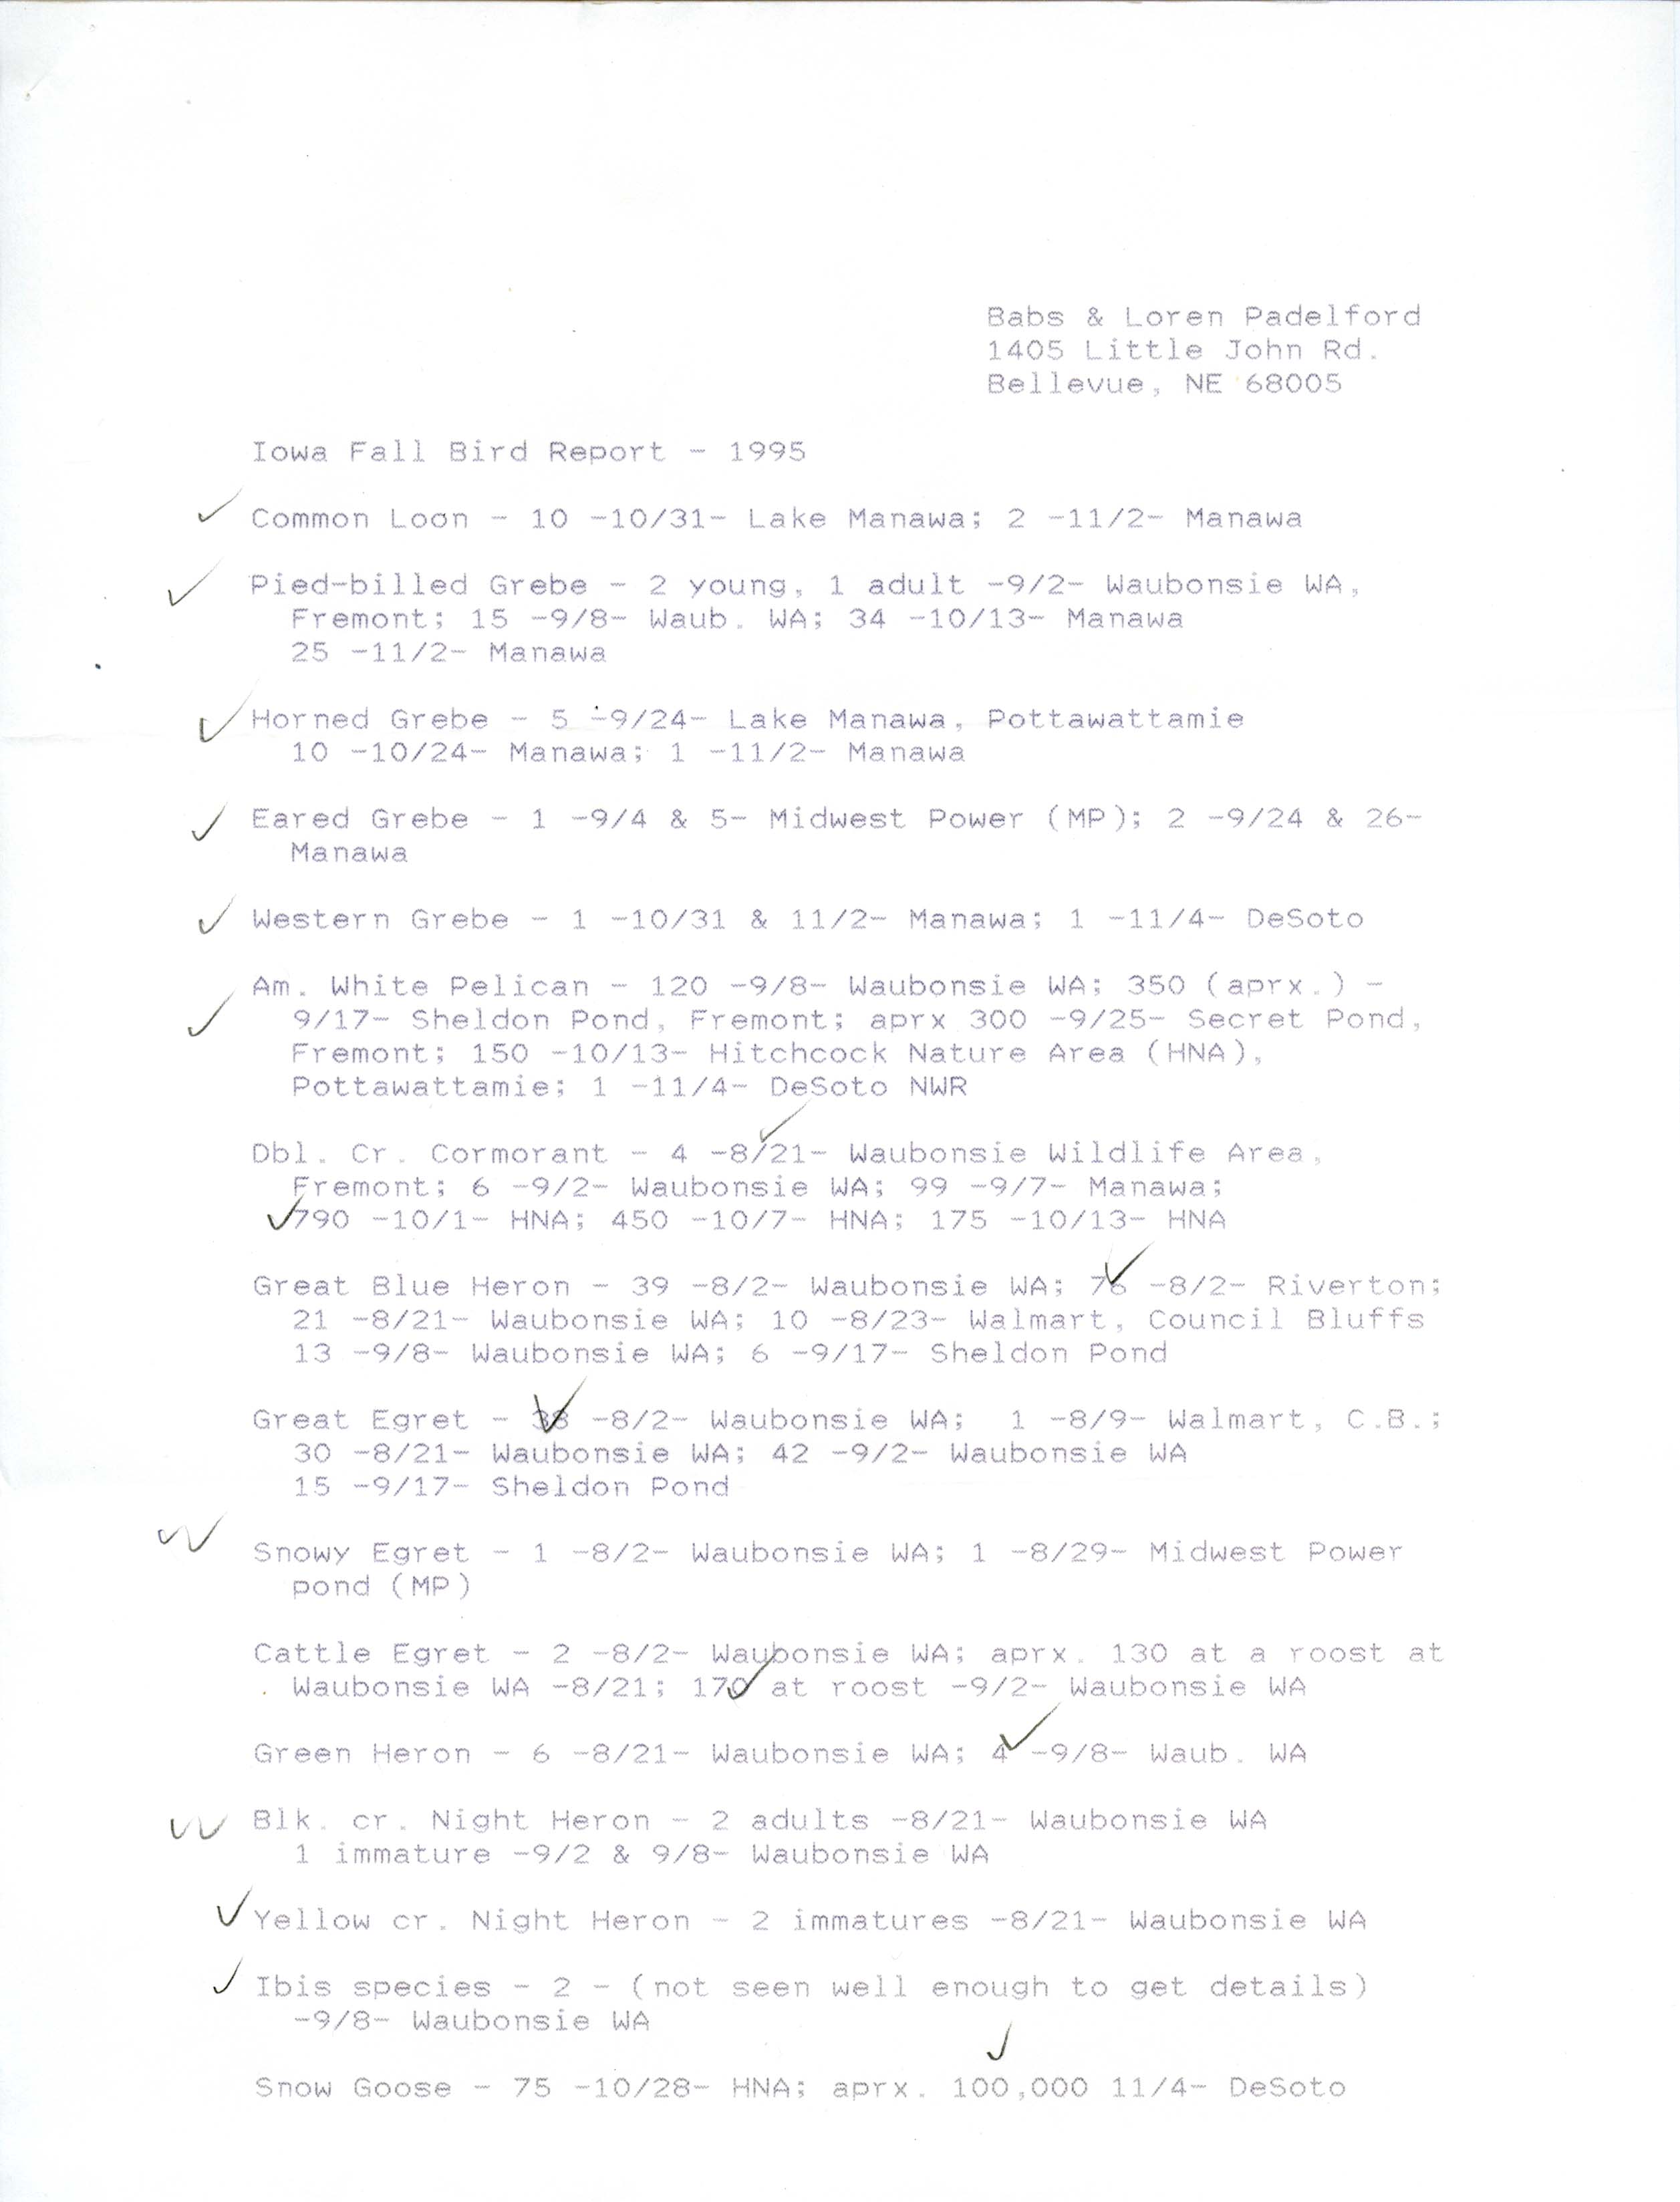 Field notes contributed by Babs Padelford and Loren Padelford, fall 1995